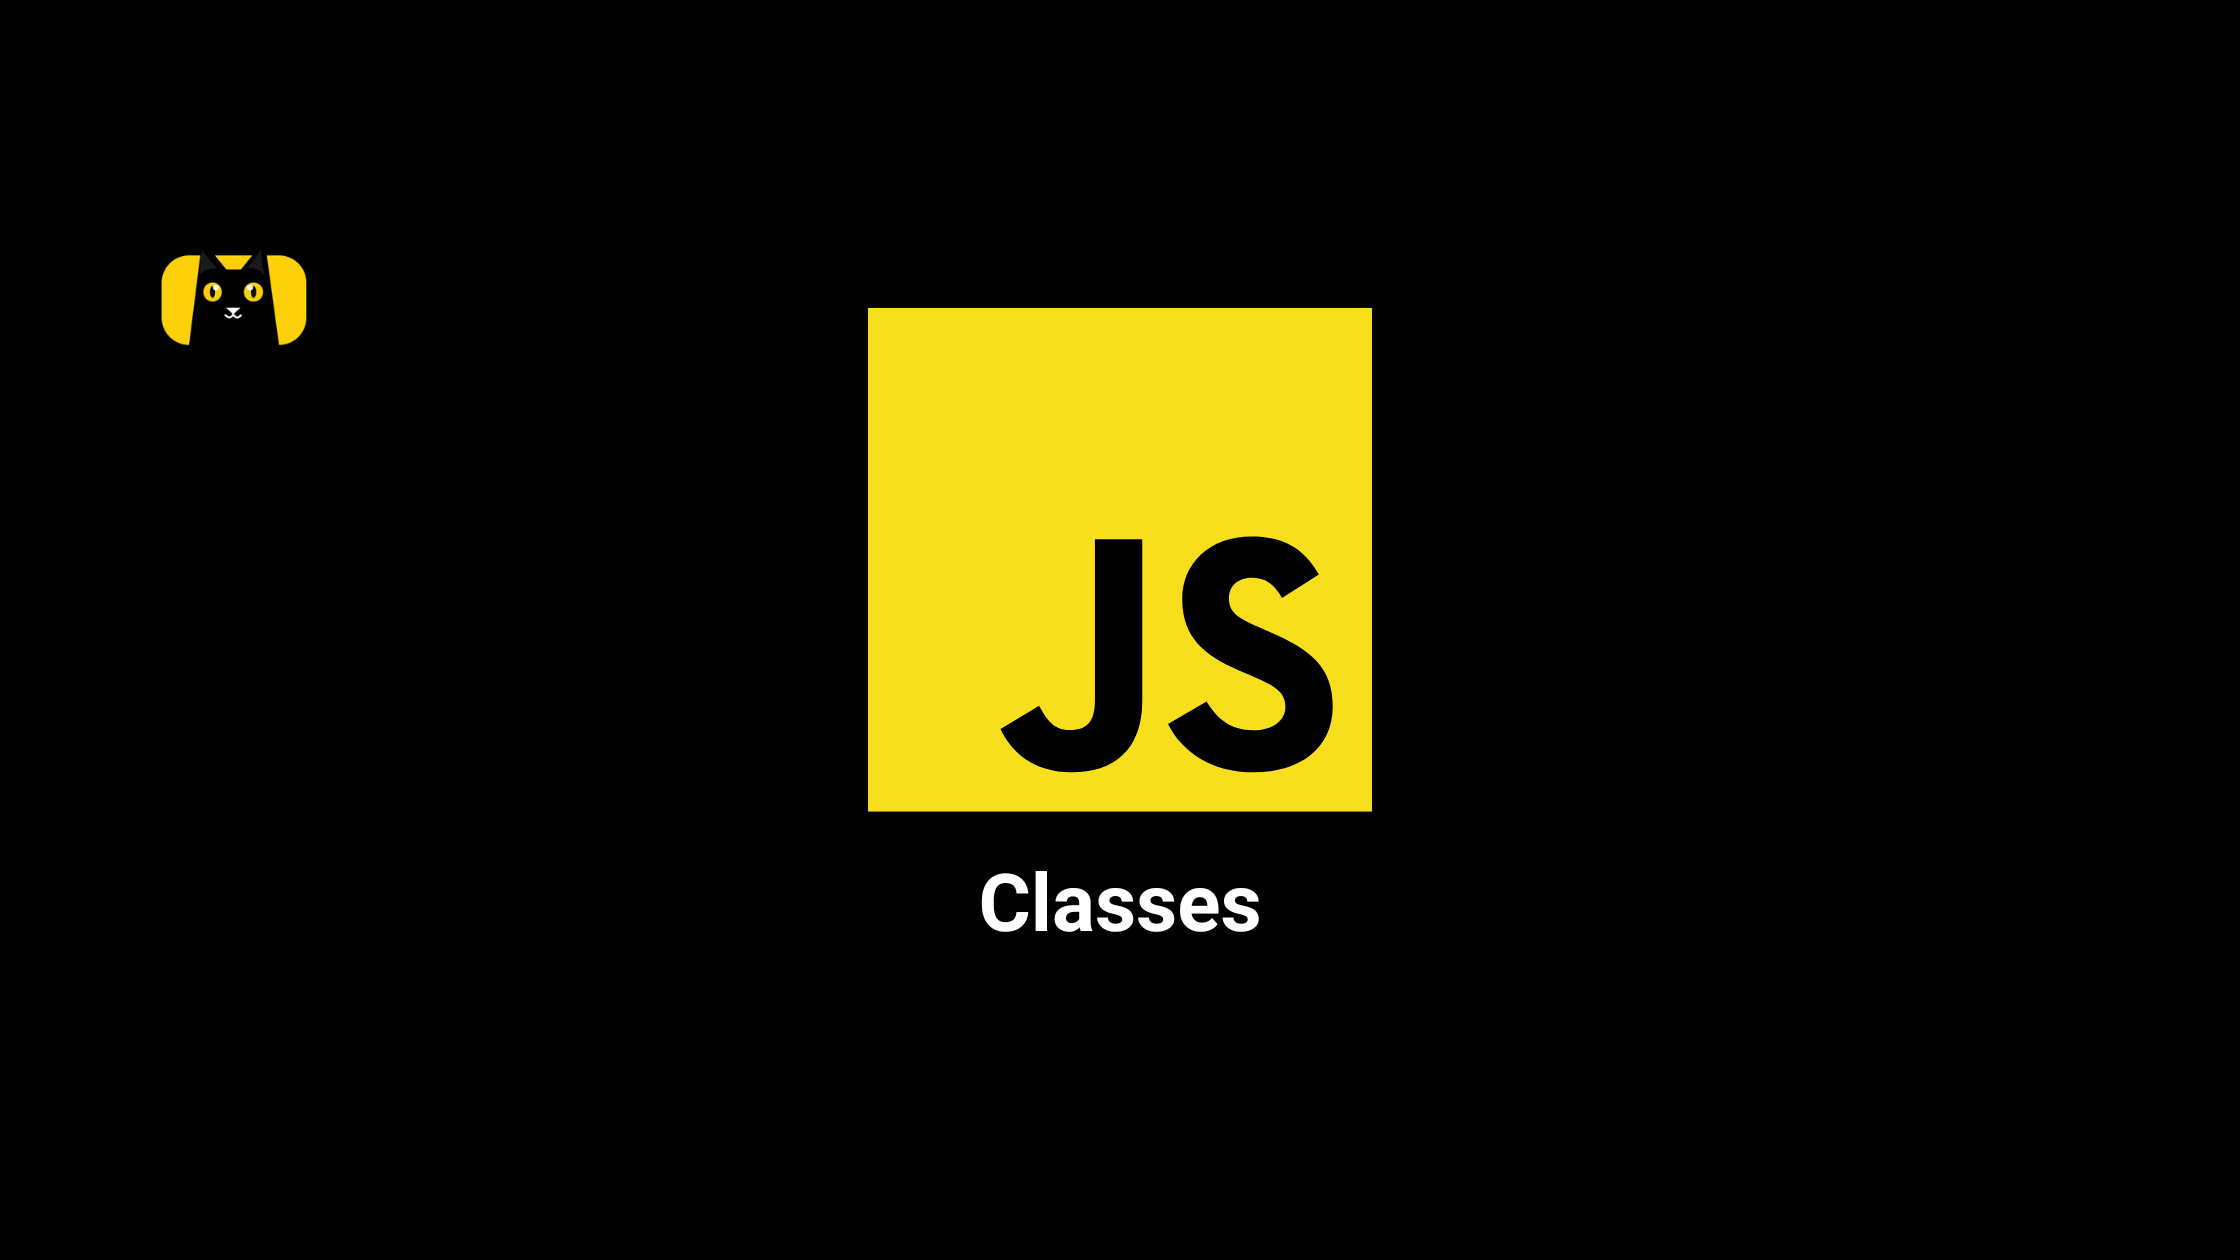 How to extend an existing TypeScript class without a subclass